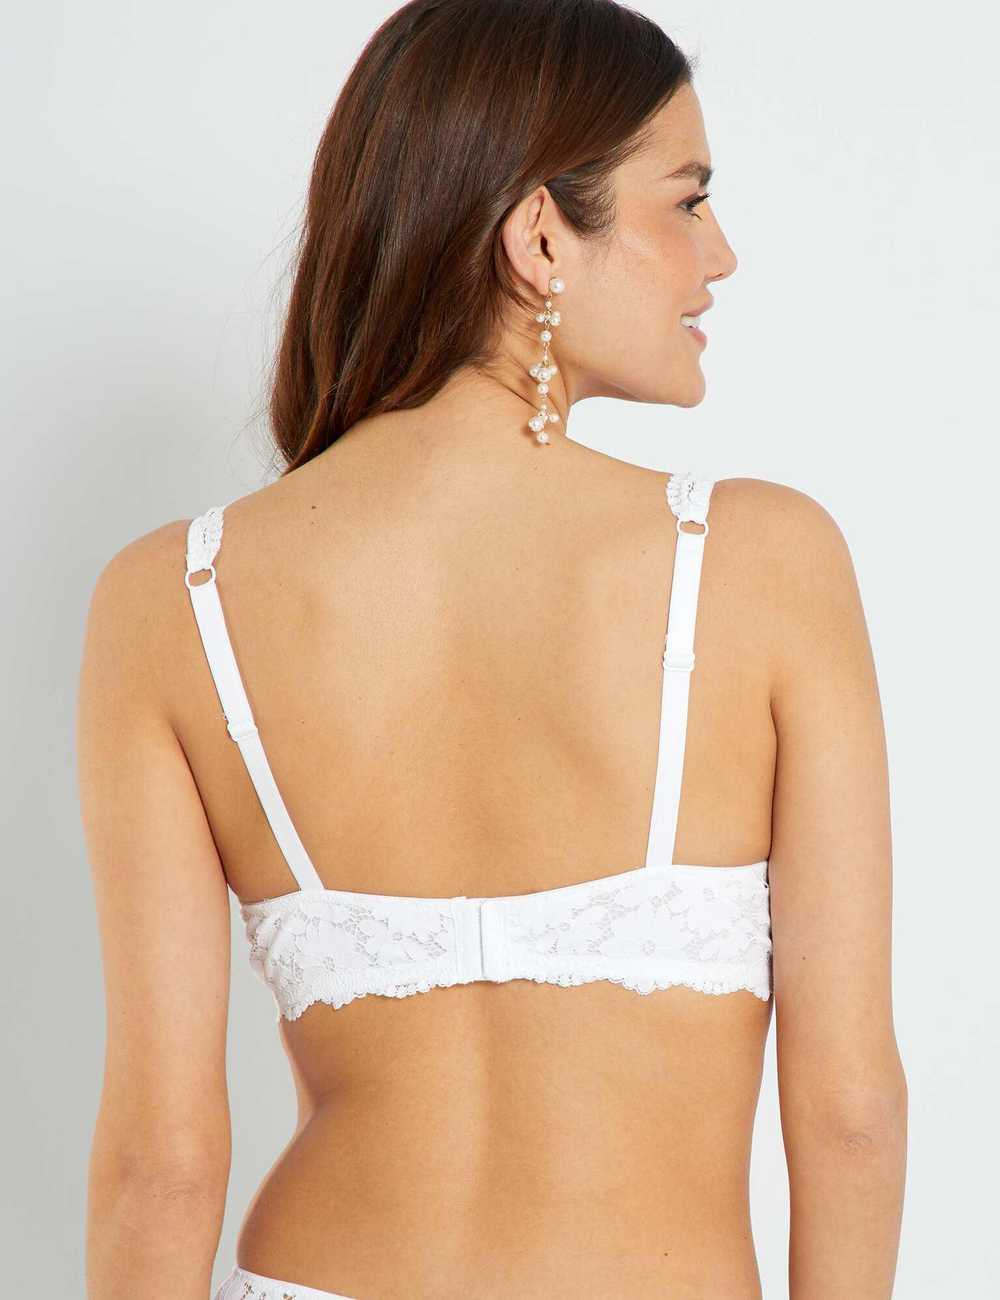 Buy Lace bra for D&E cups Online in Dubai & the UAE